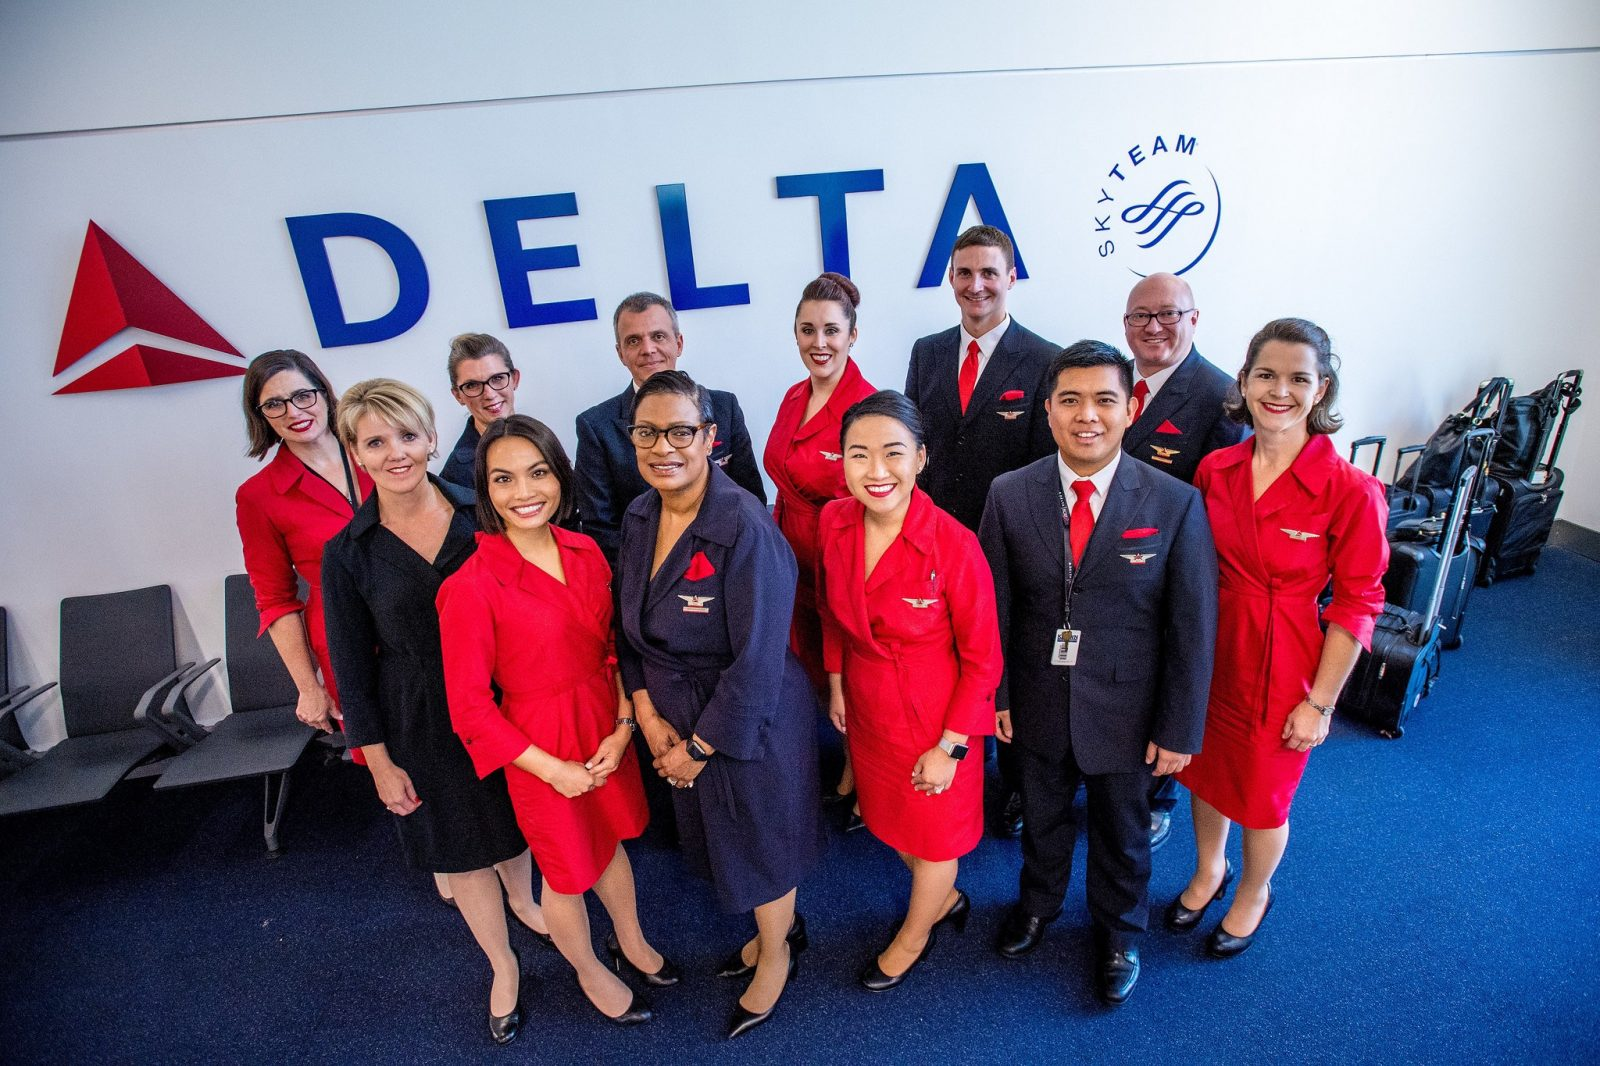 the image shows the employees of Delta Air Lines huddled together for a picture. 